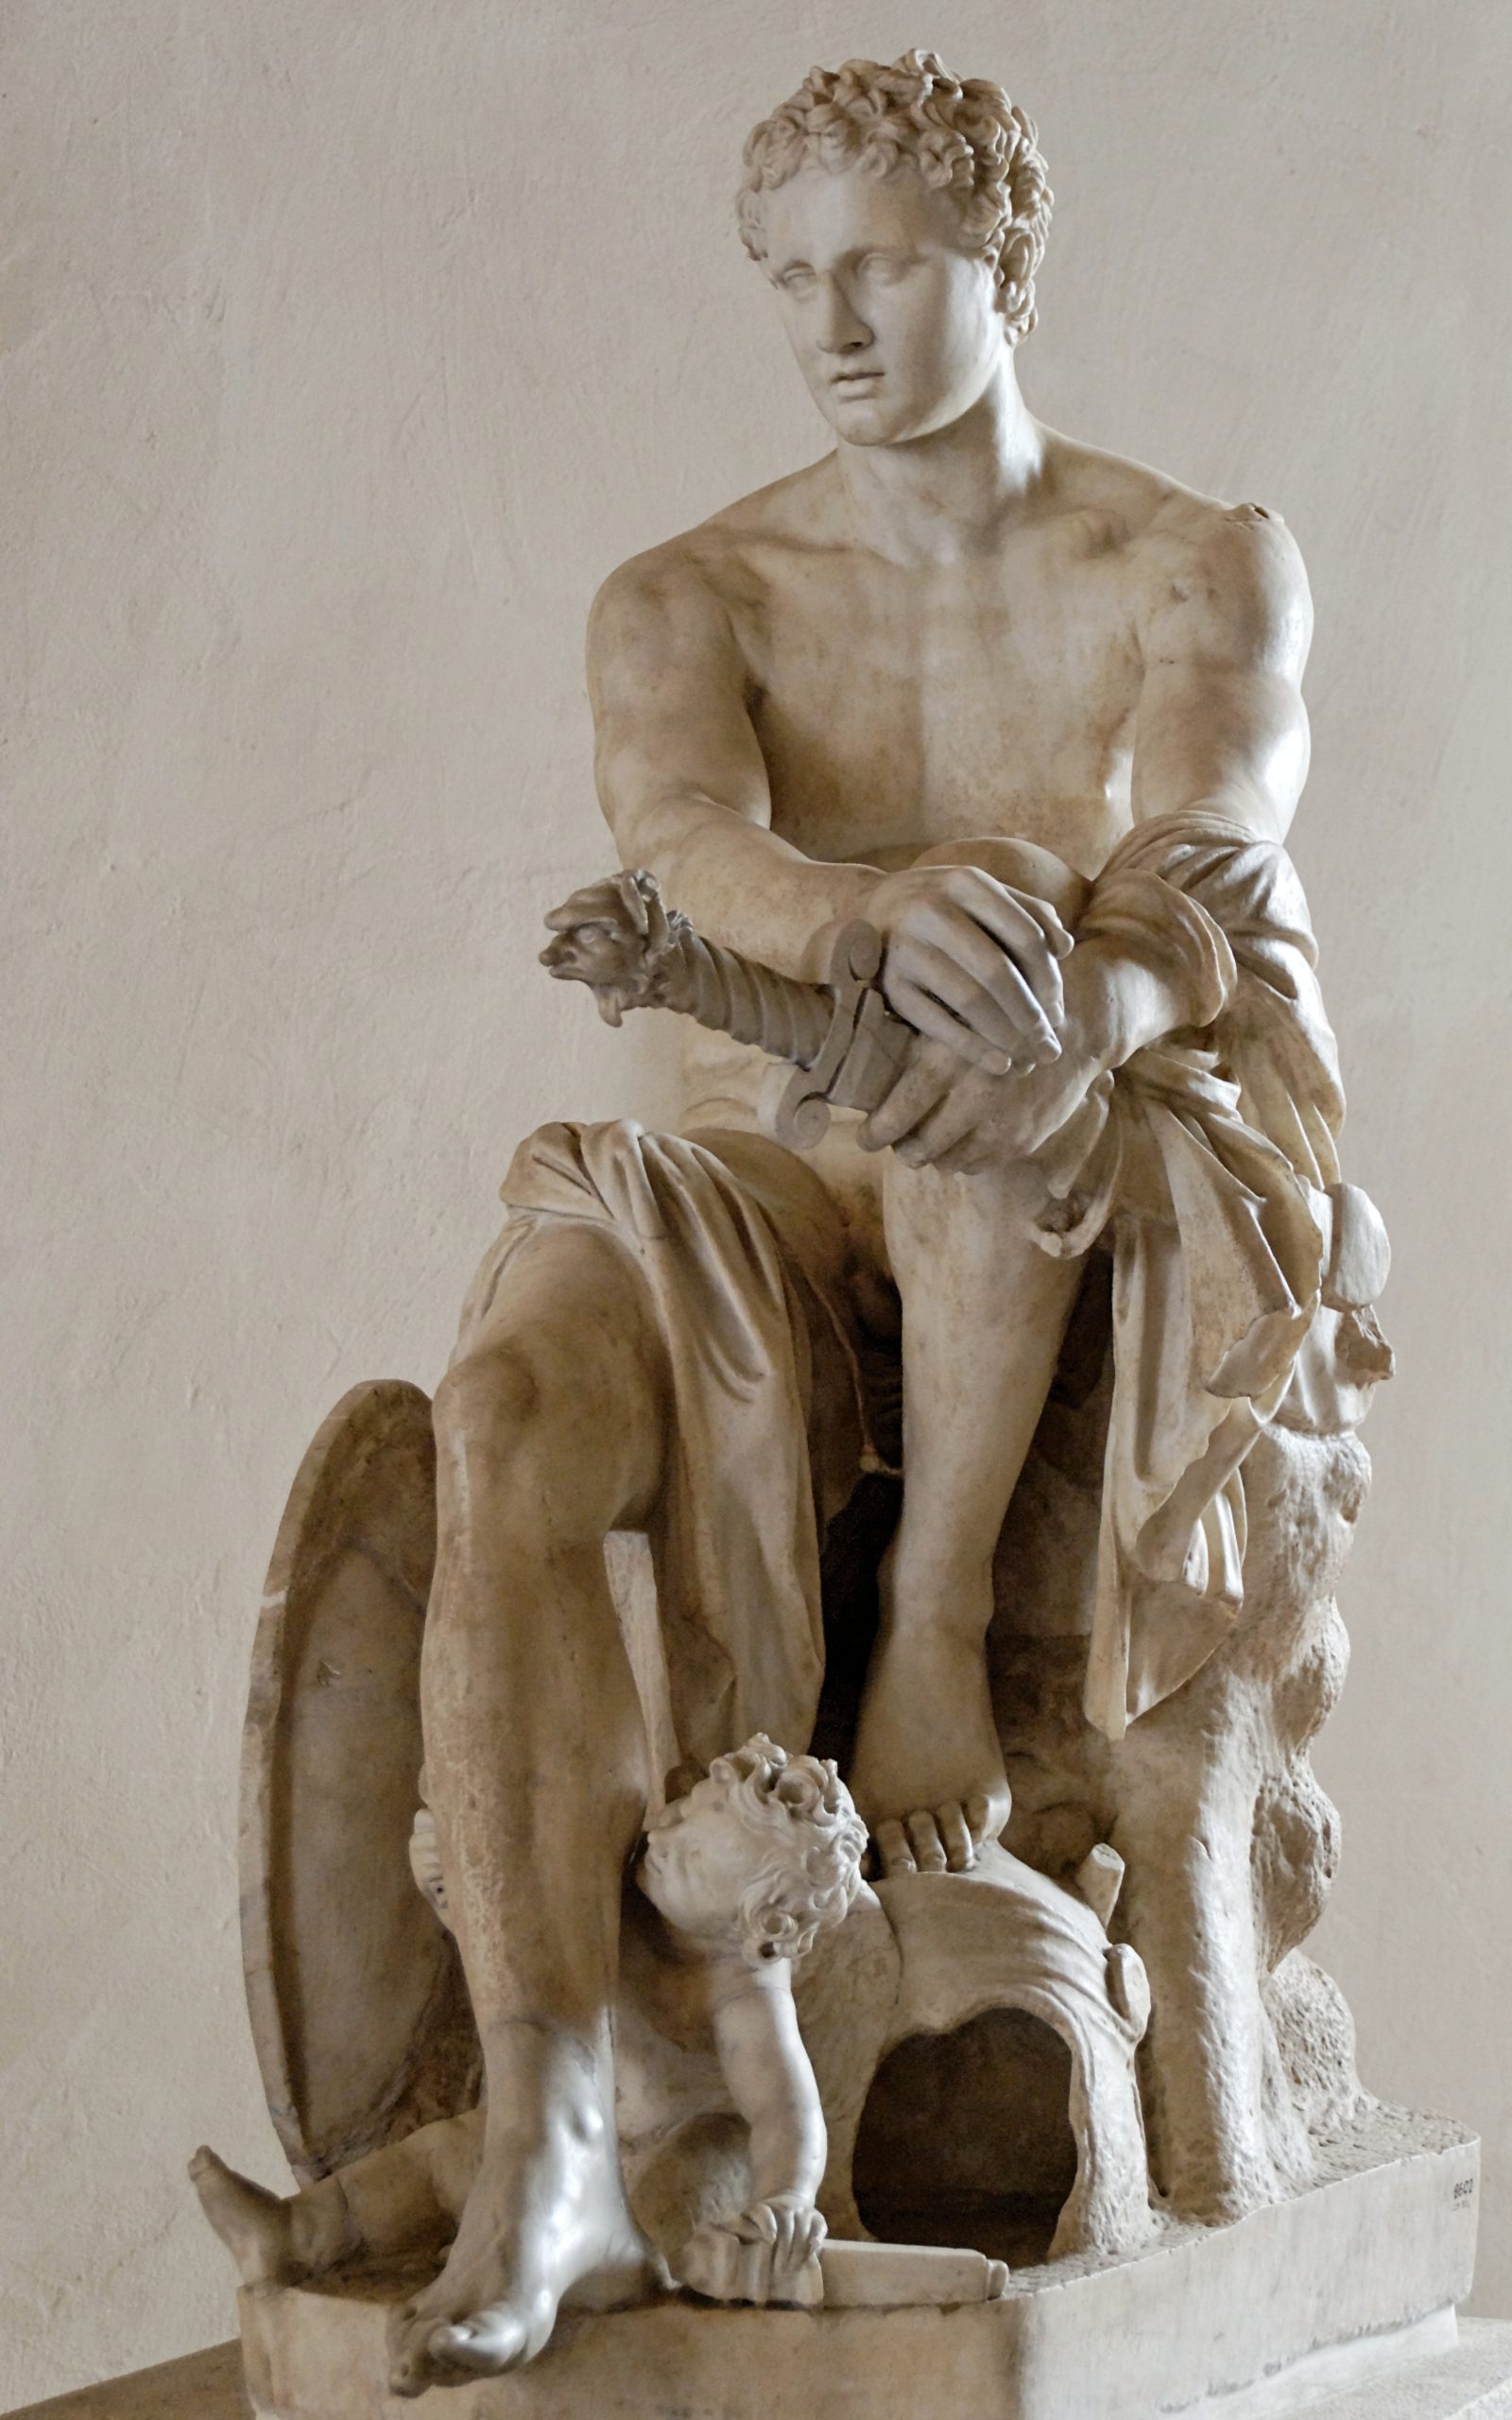 Ares seated with one foot resting on his helm. He is nude save a draped cloth, and is holding a sword. At his feet are a cupid, and Ares' shield.